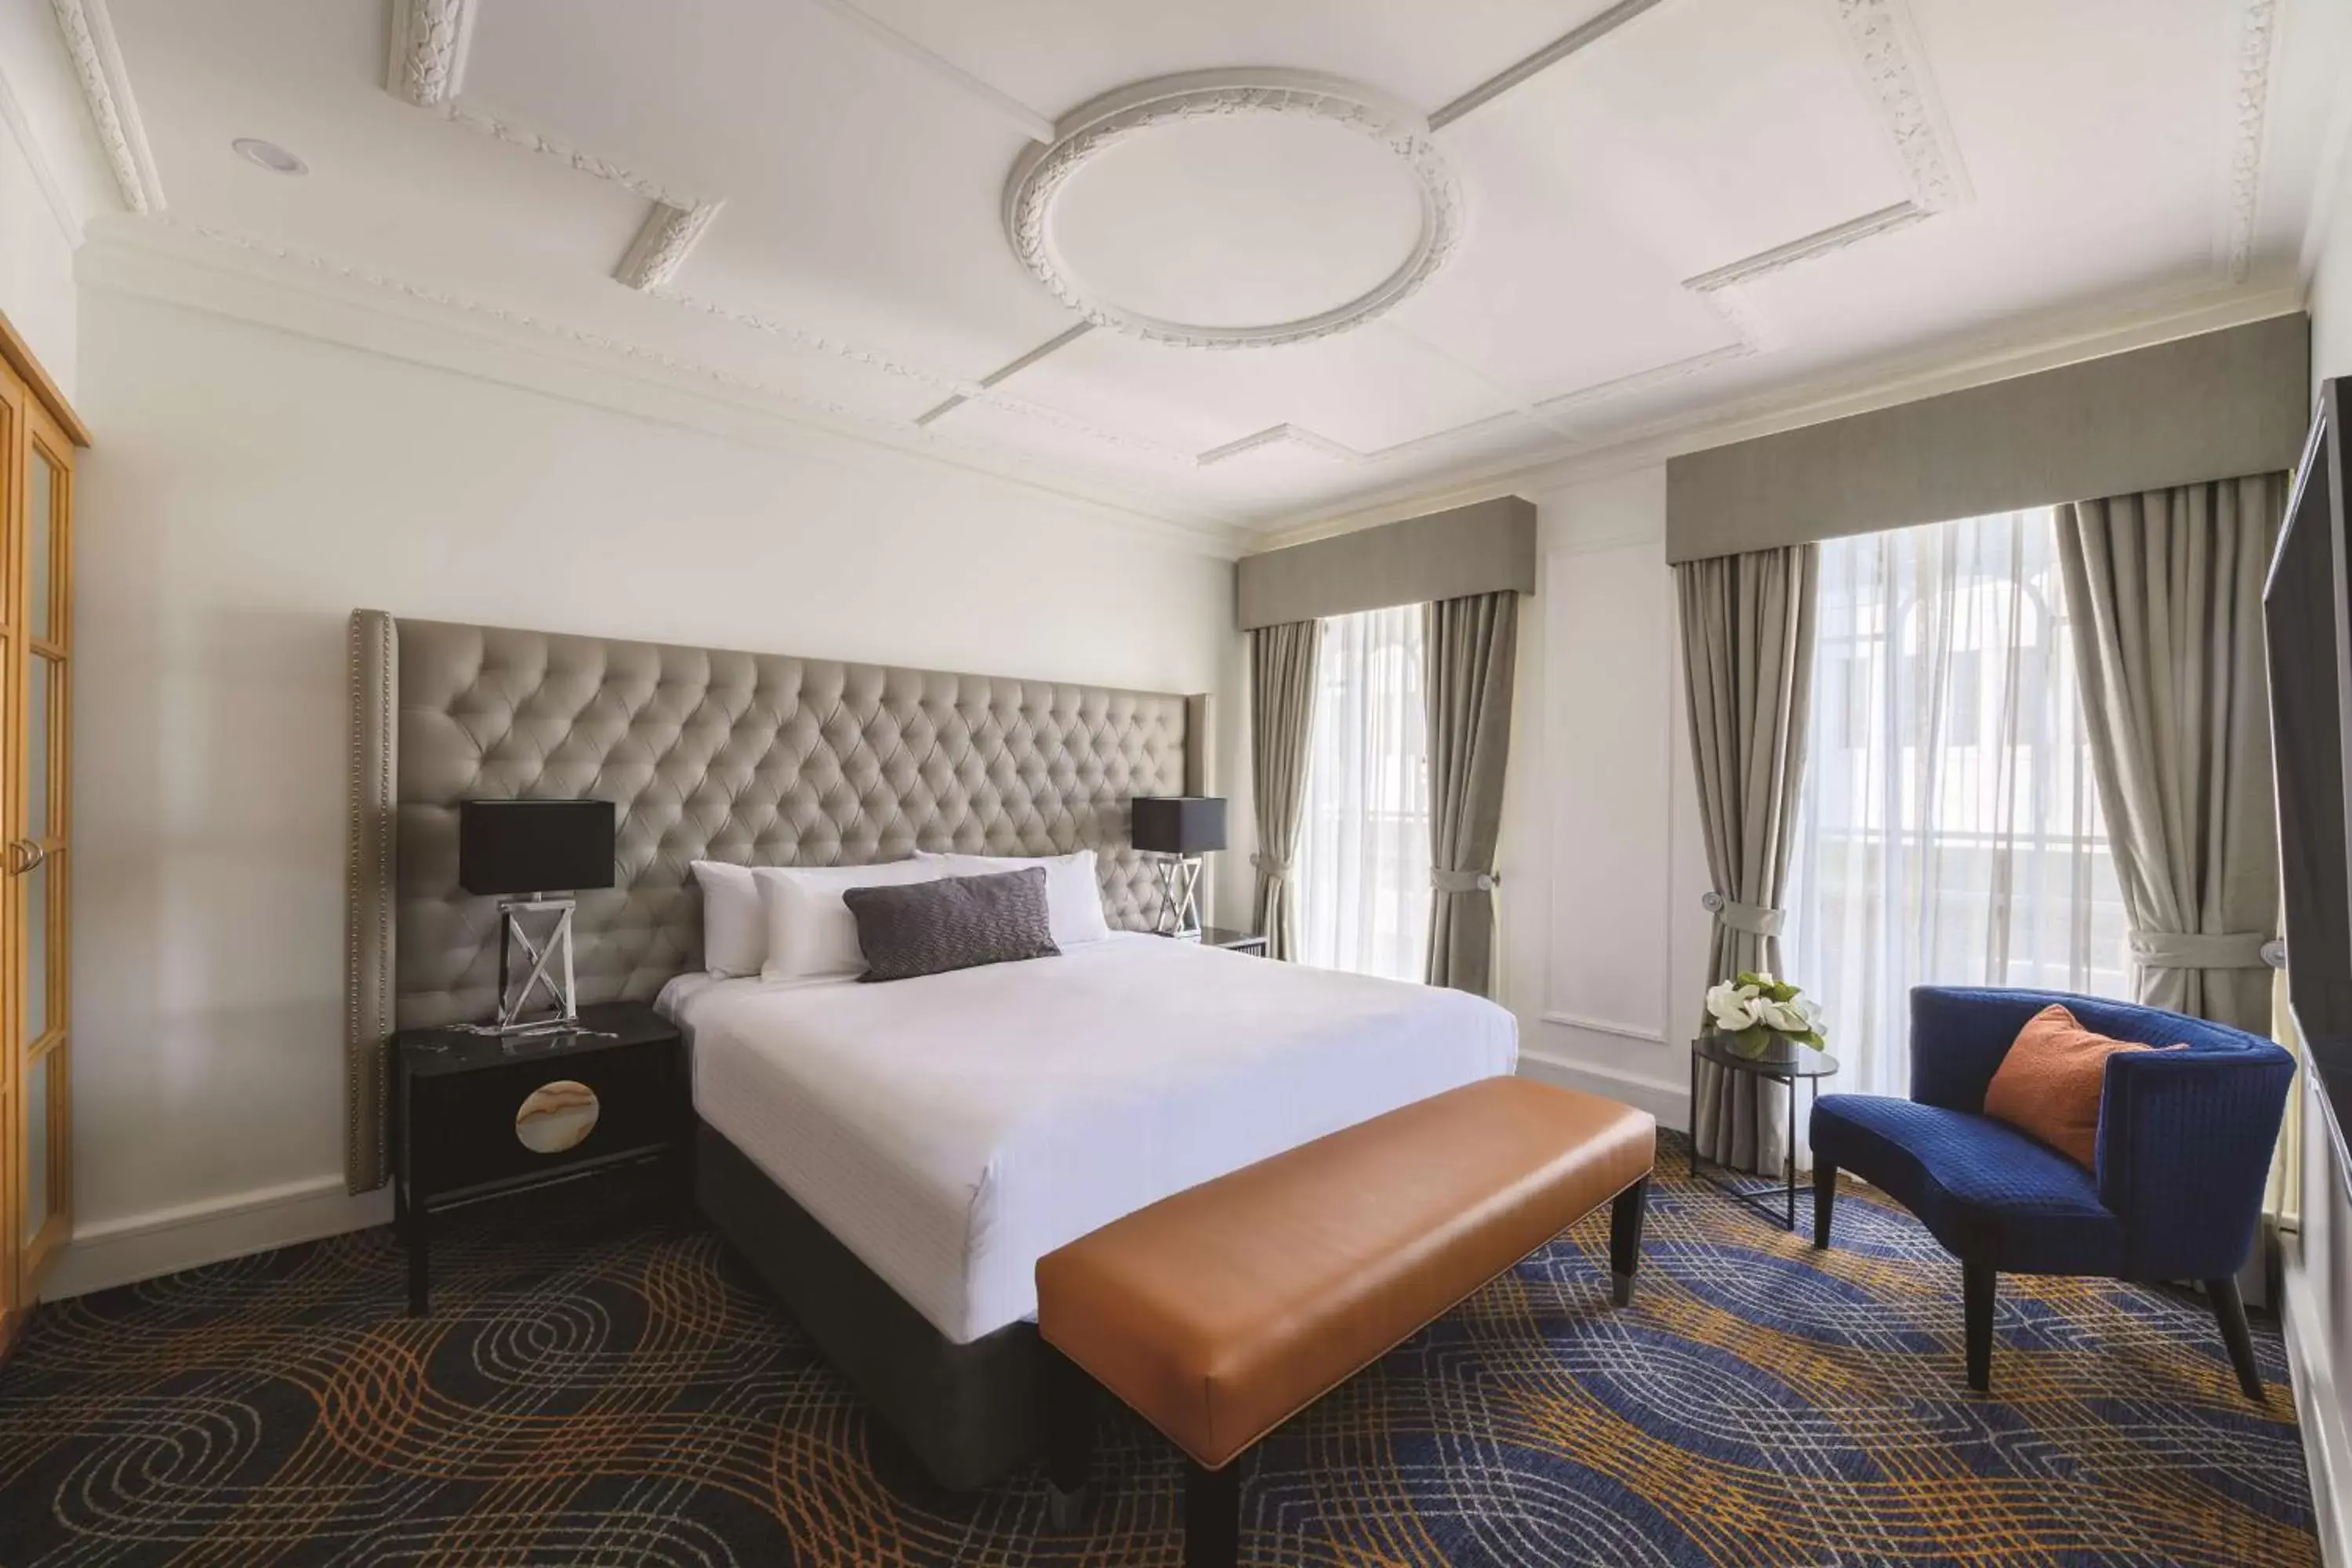 Bedroom in The Savoy Hotel on Little Collins Melbourne